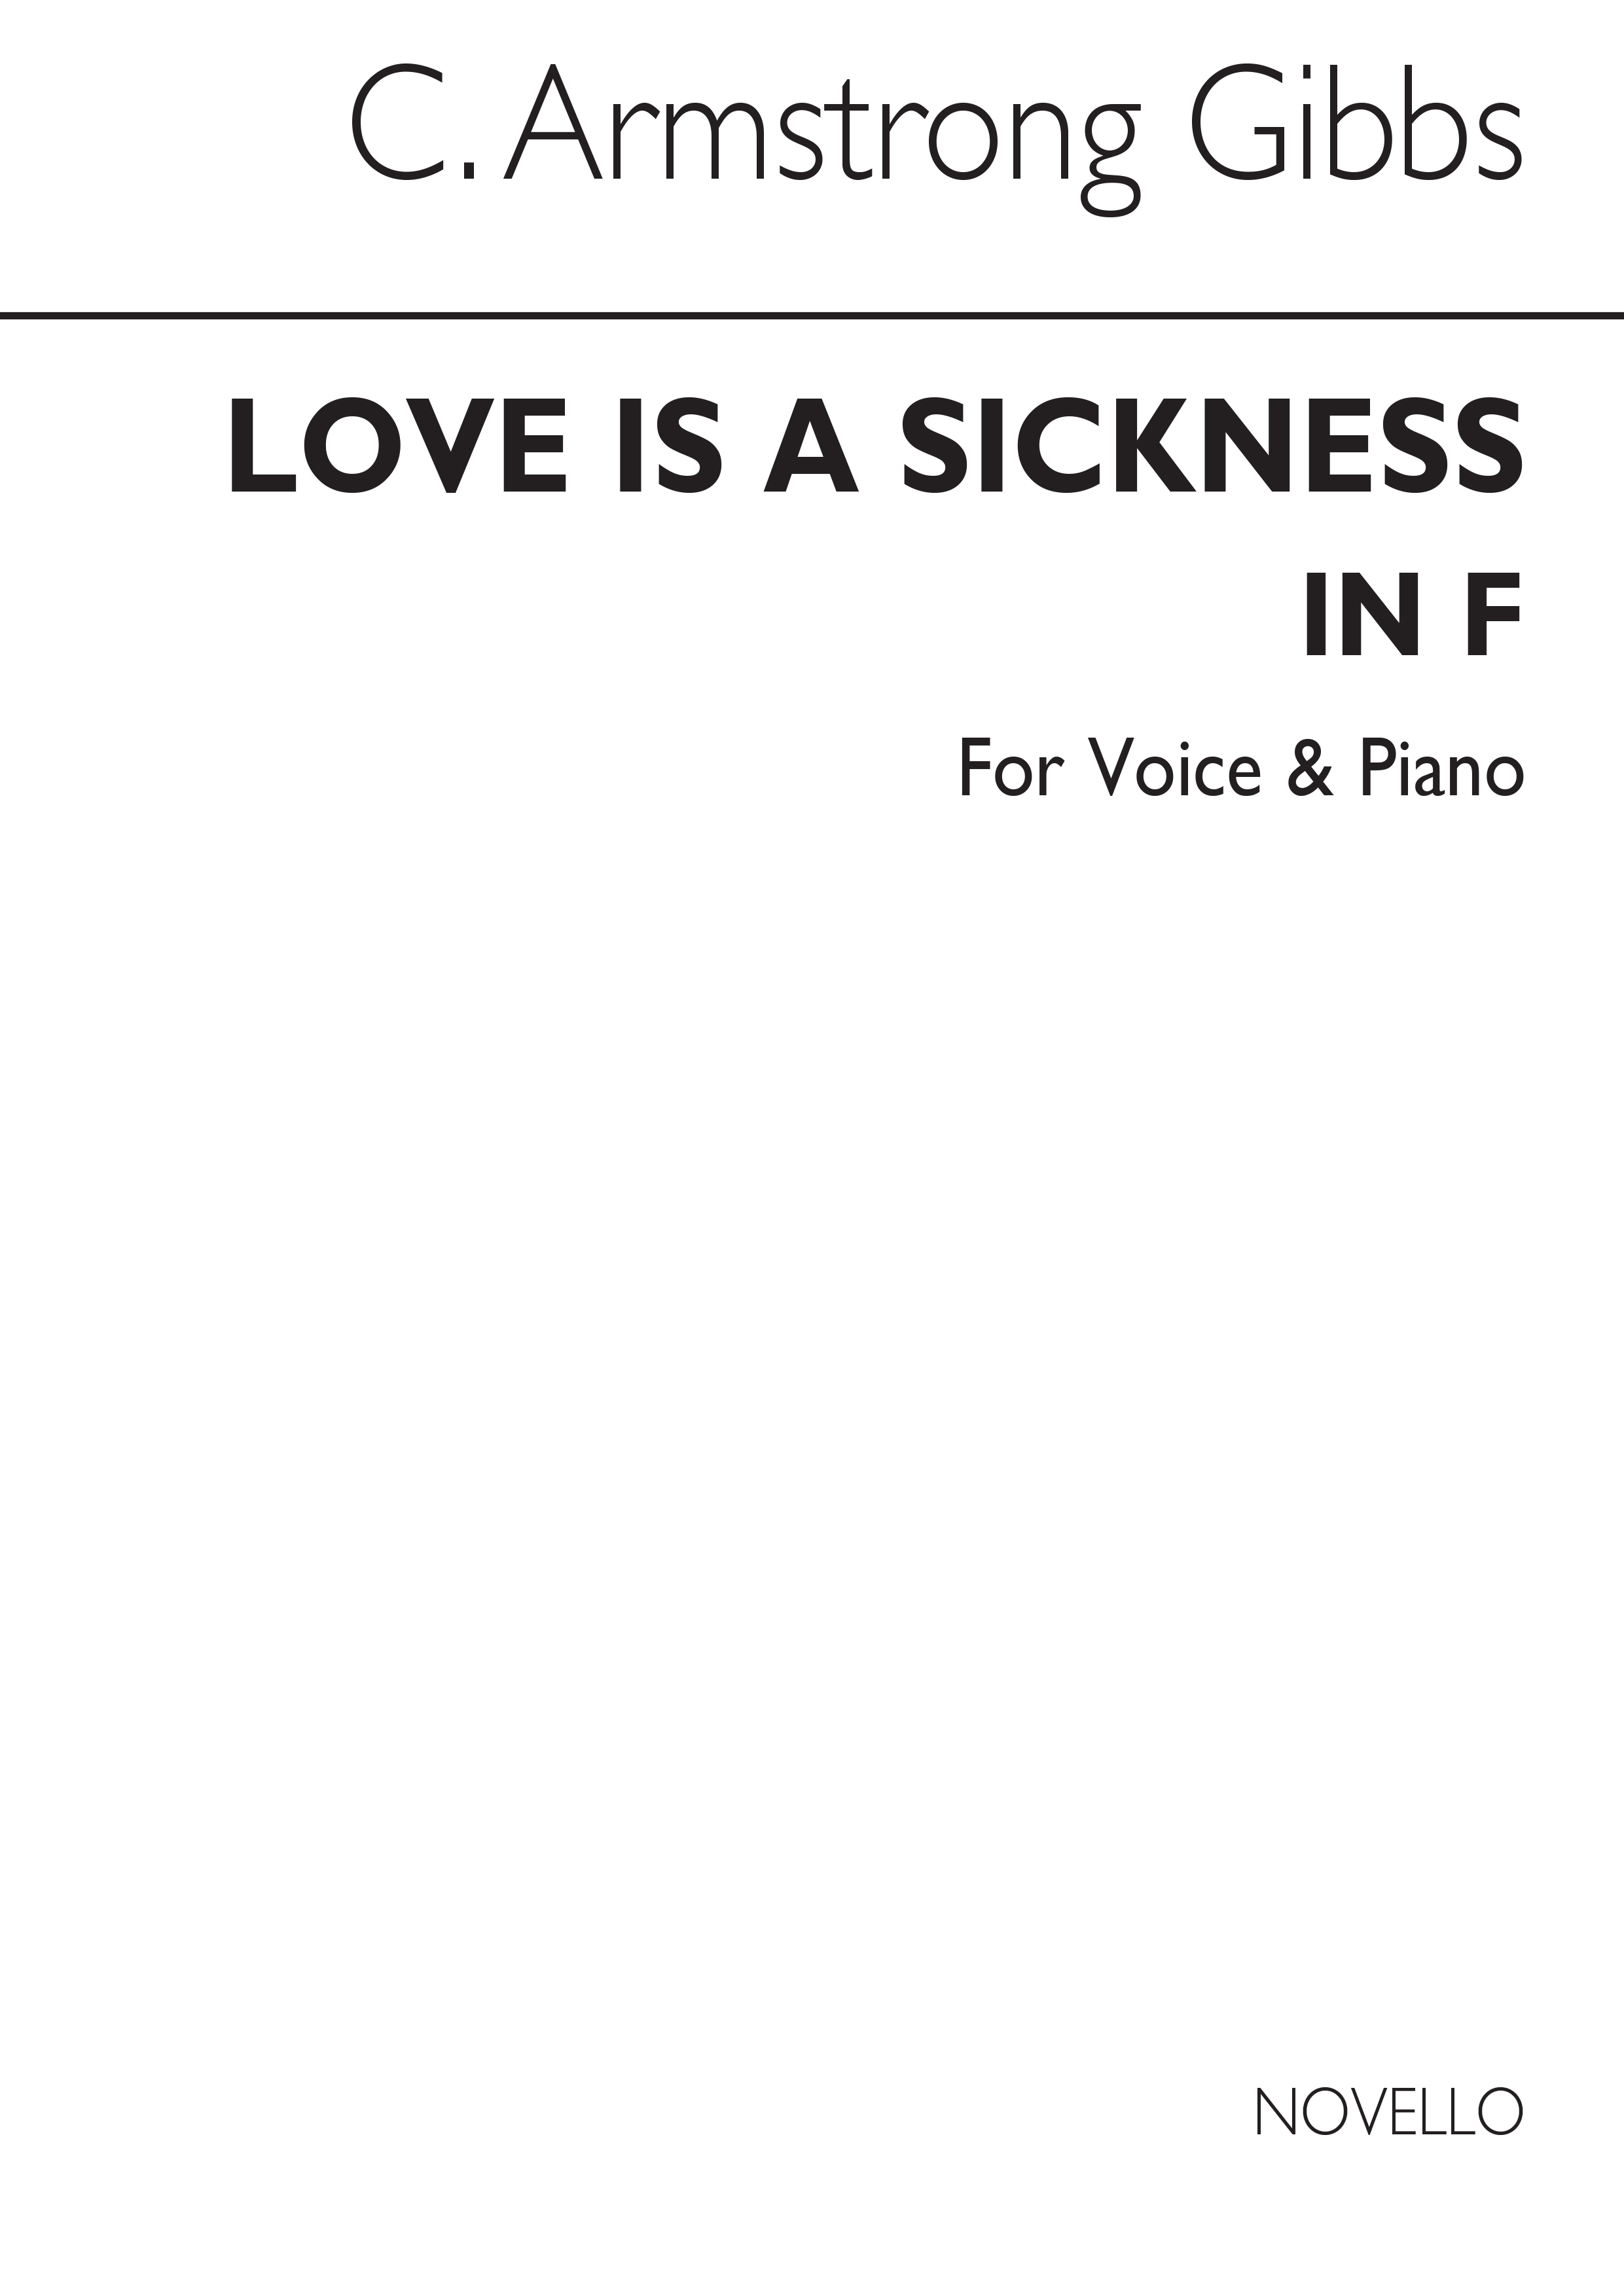 Armstrong Gibbs: Love Is A Sickness for Low Voice and Piano in F